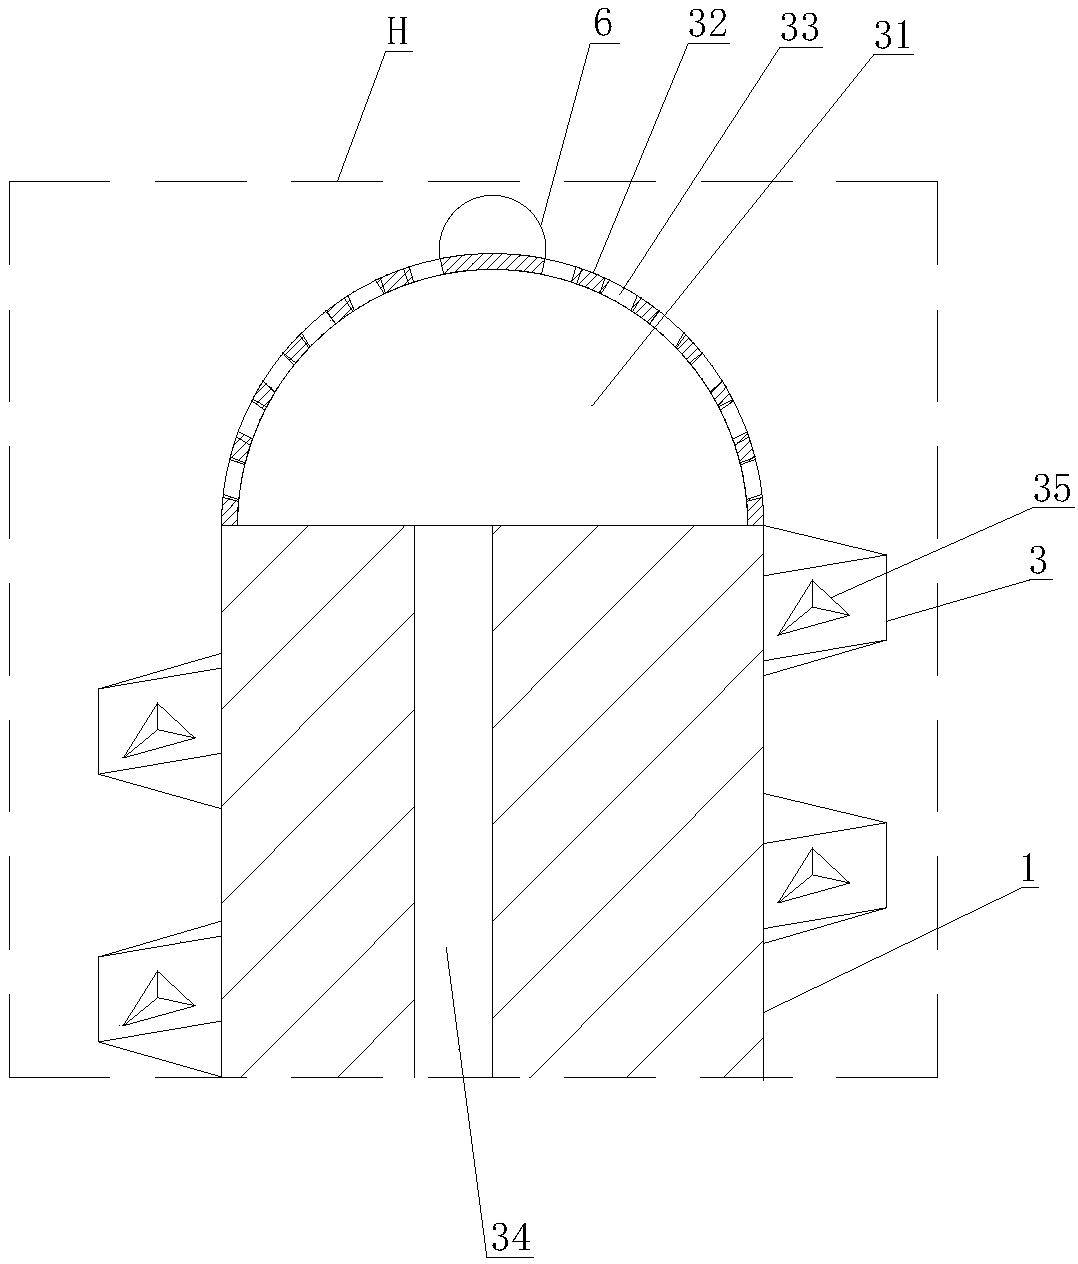 Visual anal fistula wall tissue scraping and cleaning device